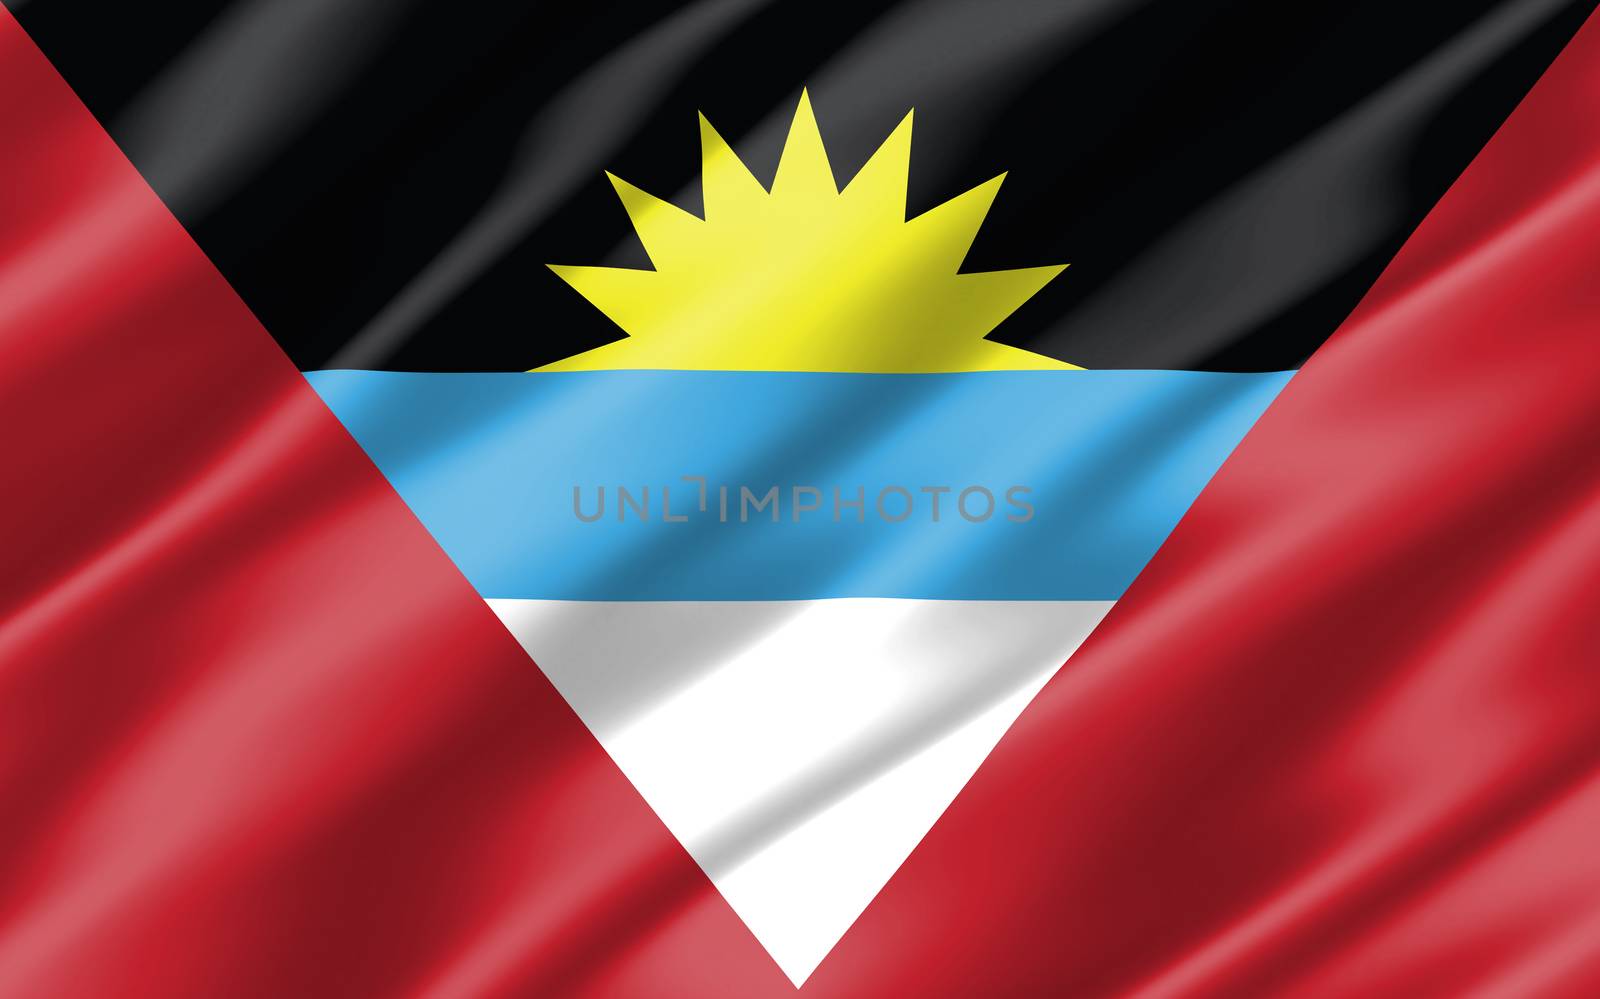 Silk wavy flag of Antigua and Barbuda graphic. Wavy Antiguan and Barbudan flag 3D illustration. Rippled Antigua and Barbuda country flag is a symbol of freedom, patriotism and independence. by Skylark